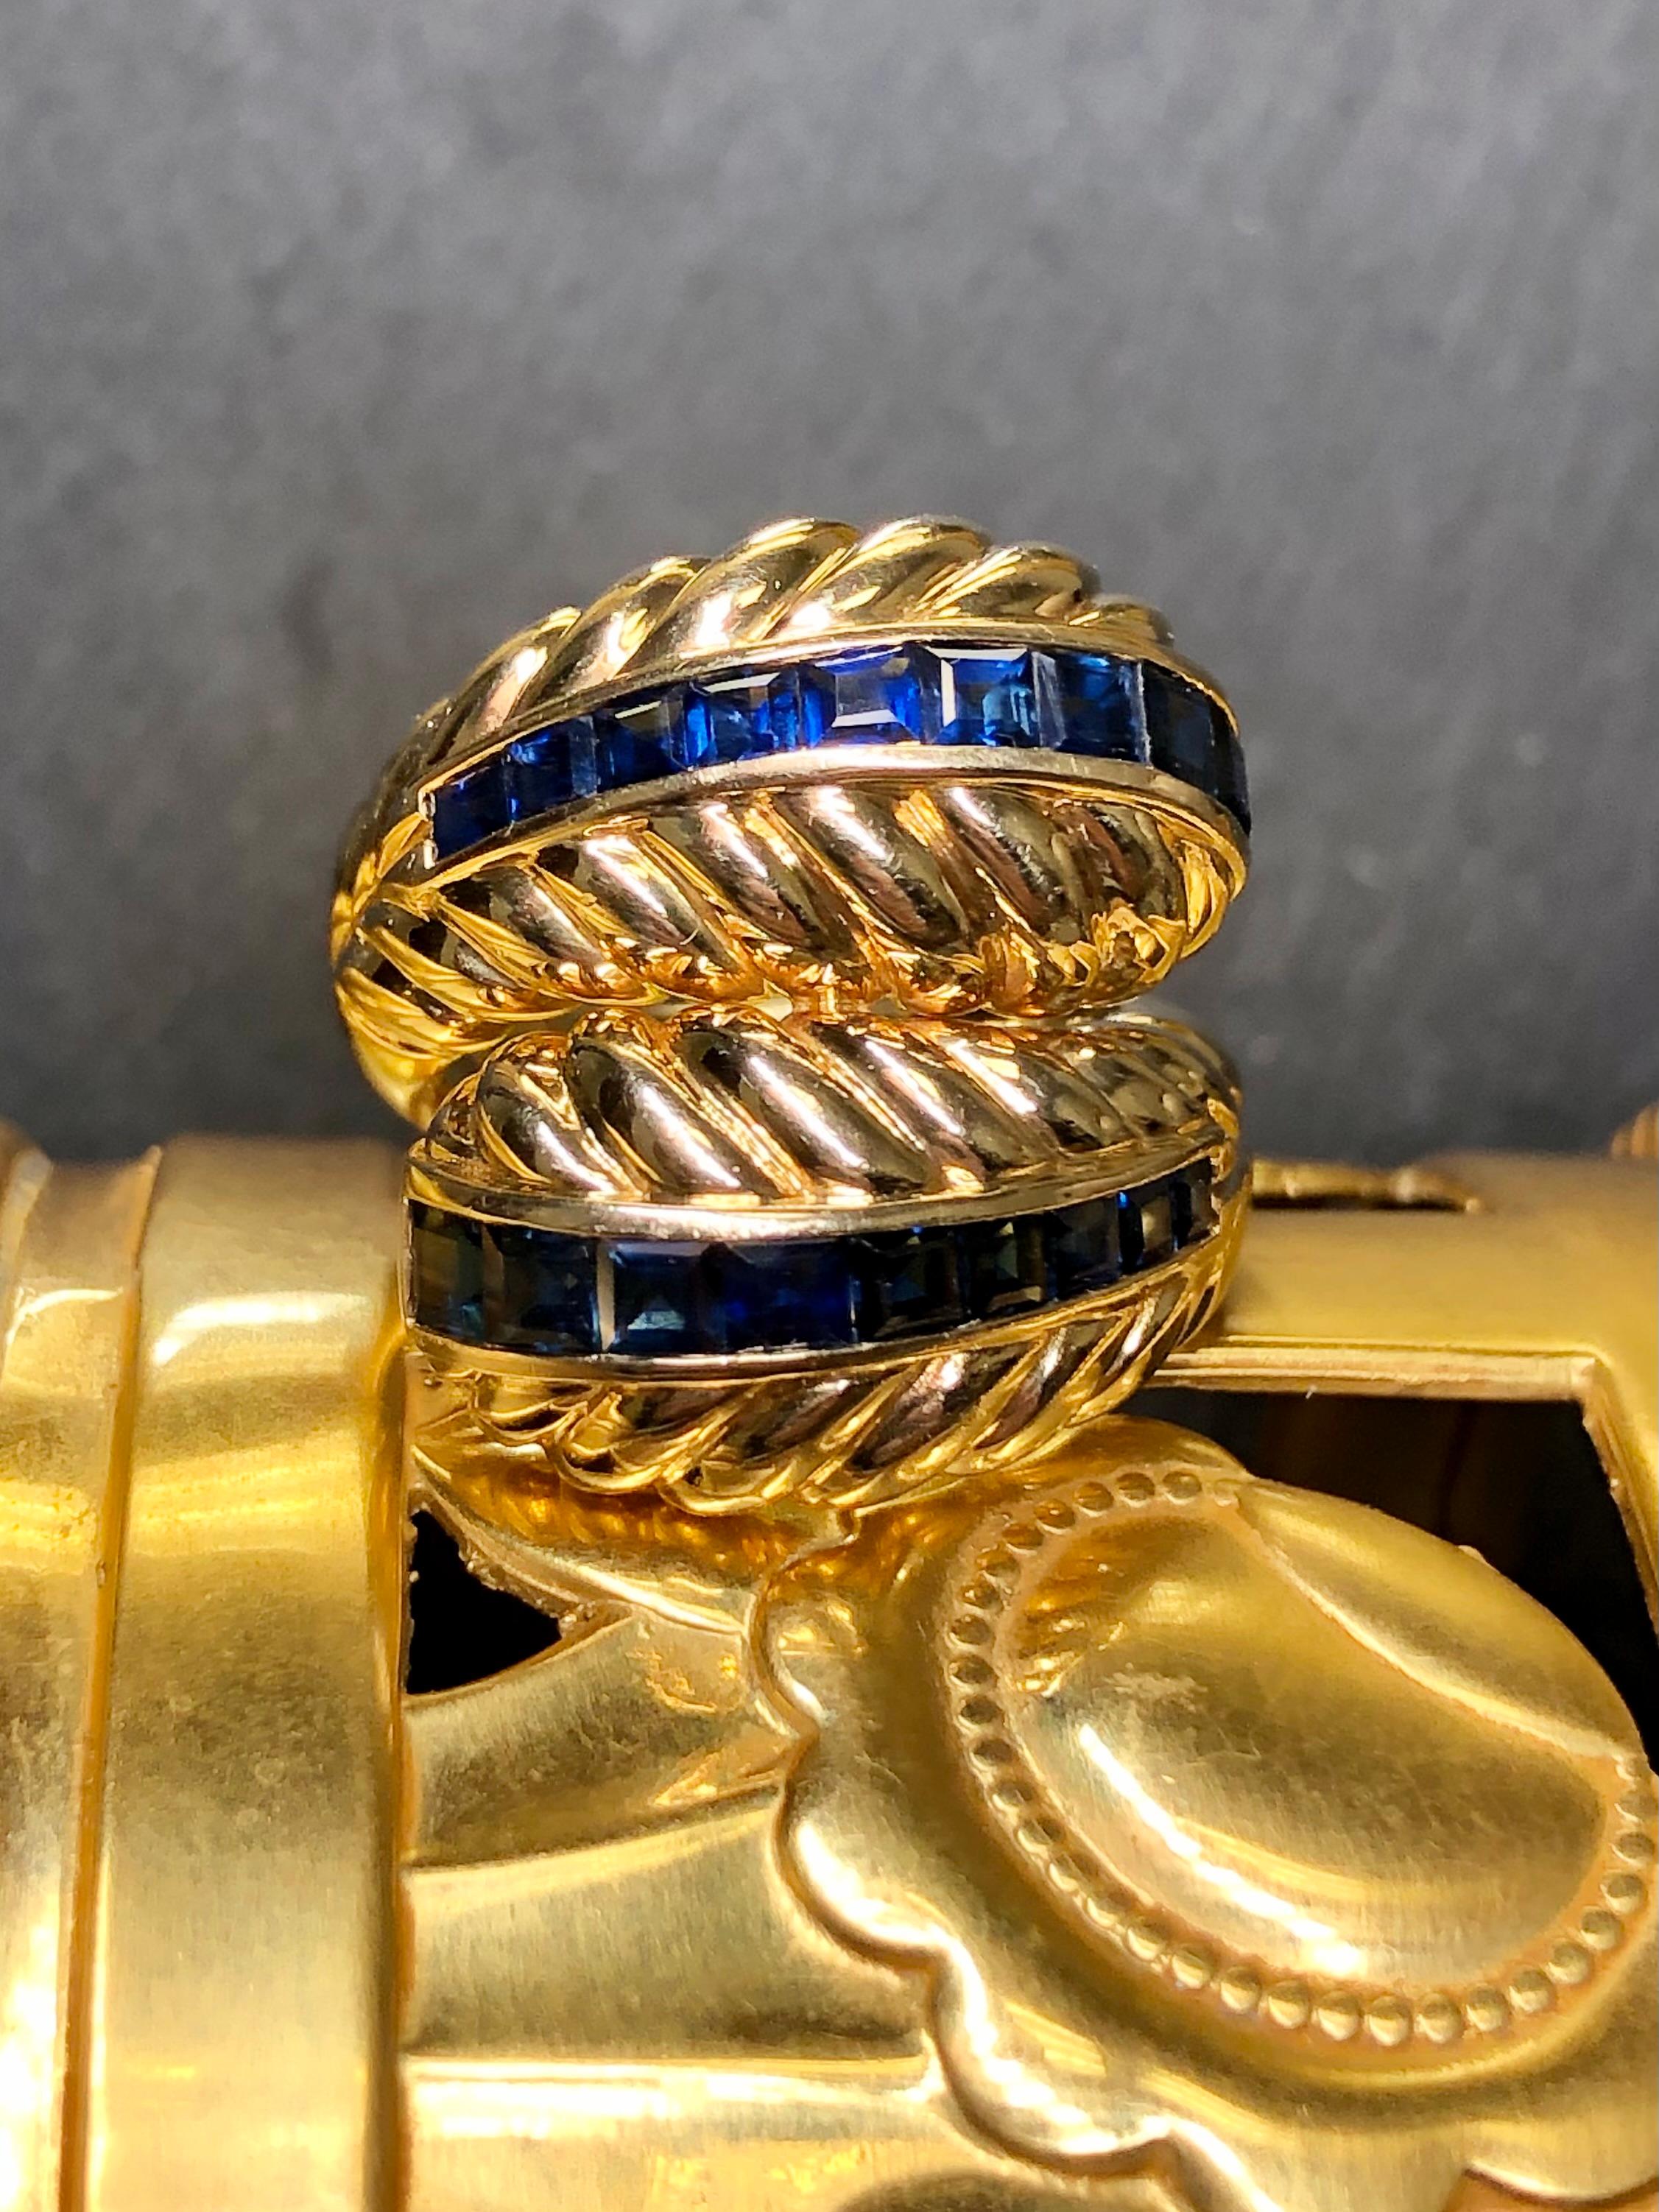 
A classic ring done by famed Italian designer SABBADINI. This timeless piece is hand crafted in 18K yellow gold in a scalloped design and channel set with approximately 3cttw in square cut natural sapphires.


Dimensions/Weight:

Ring measures 1”